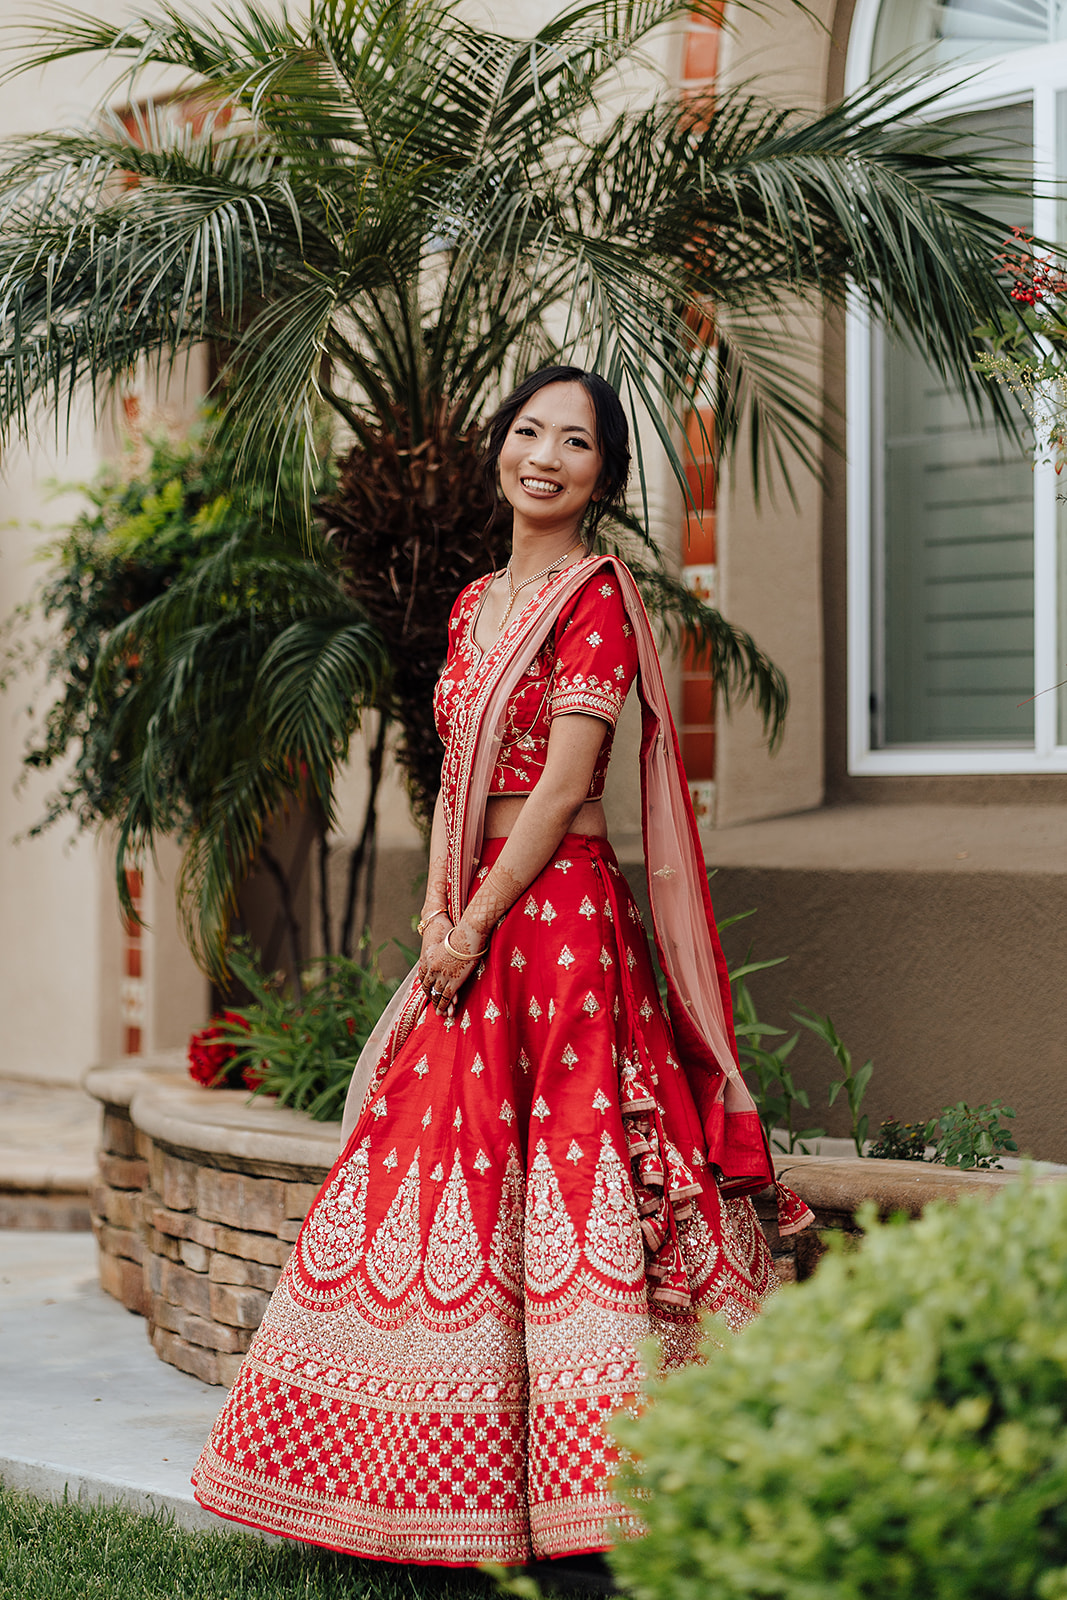 Chinese bride dressed in traditional indian wedding gown in Orange County California